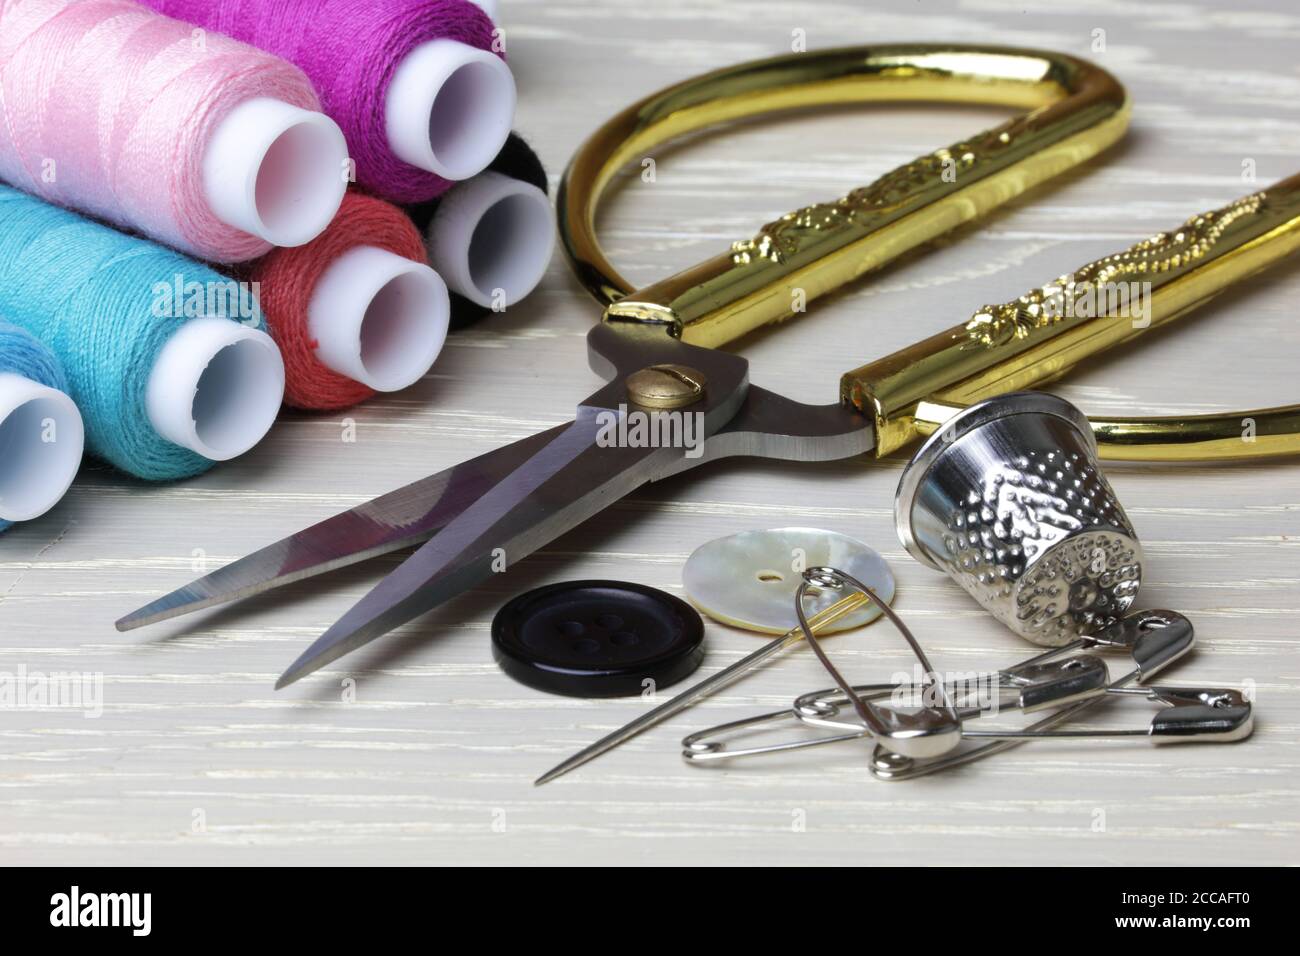 Scissors and sewing supplies thimble cotton pins Stock Photo